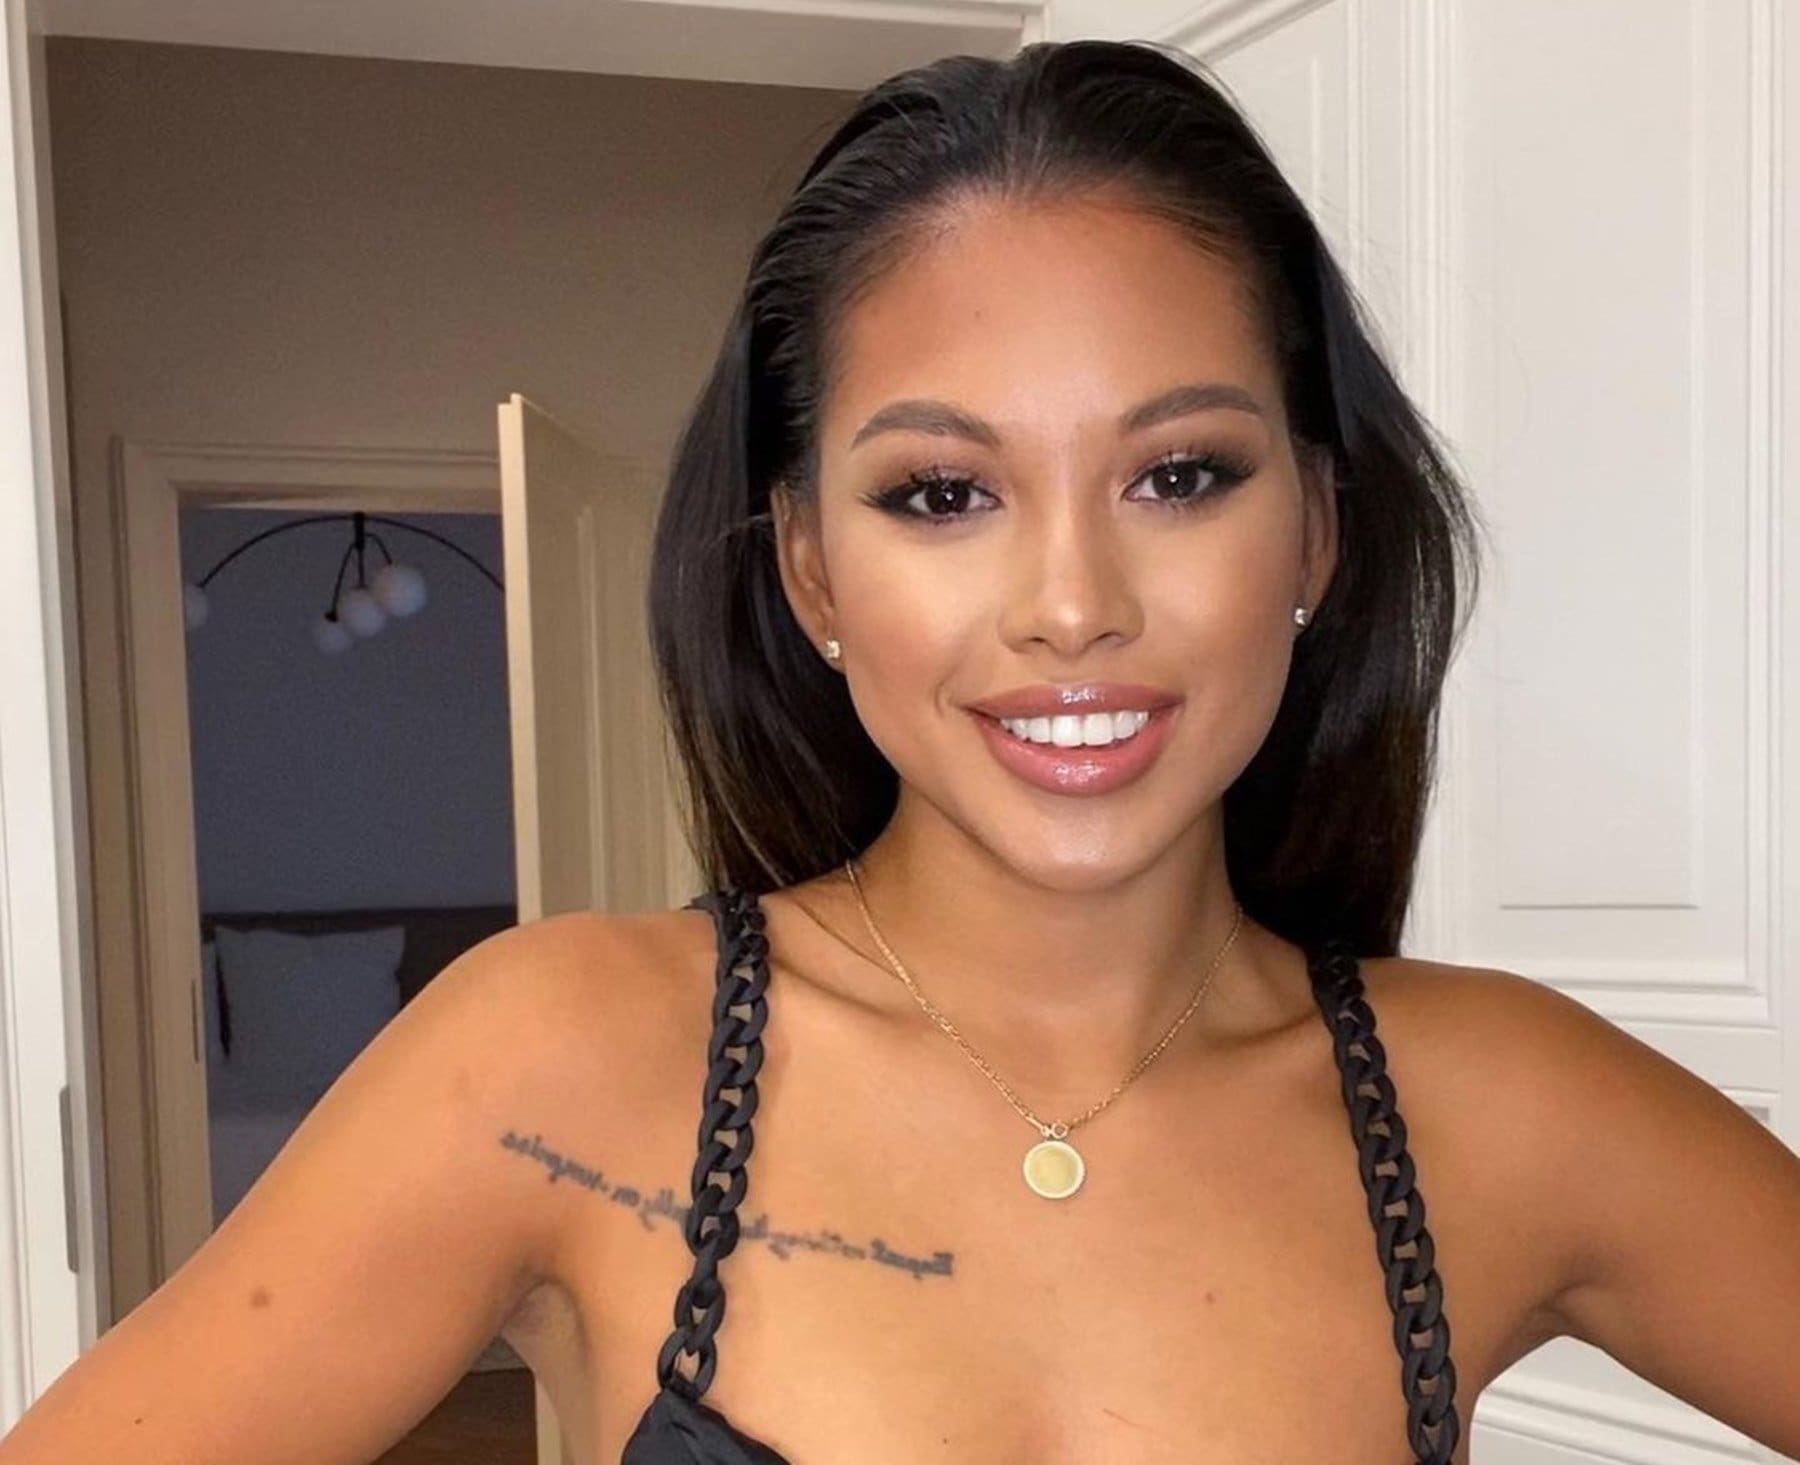 Chris Brown's Baby Mama, Ammika Harris Is Waiting For Gyms To Reopen